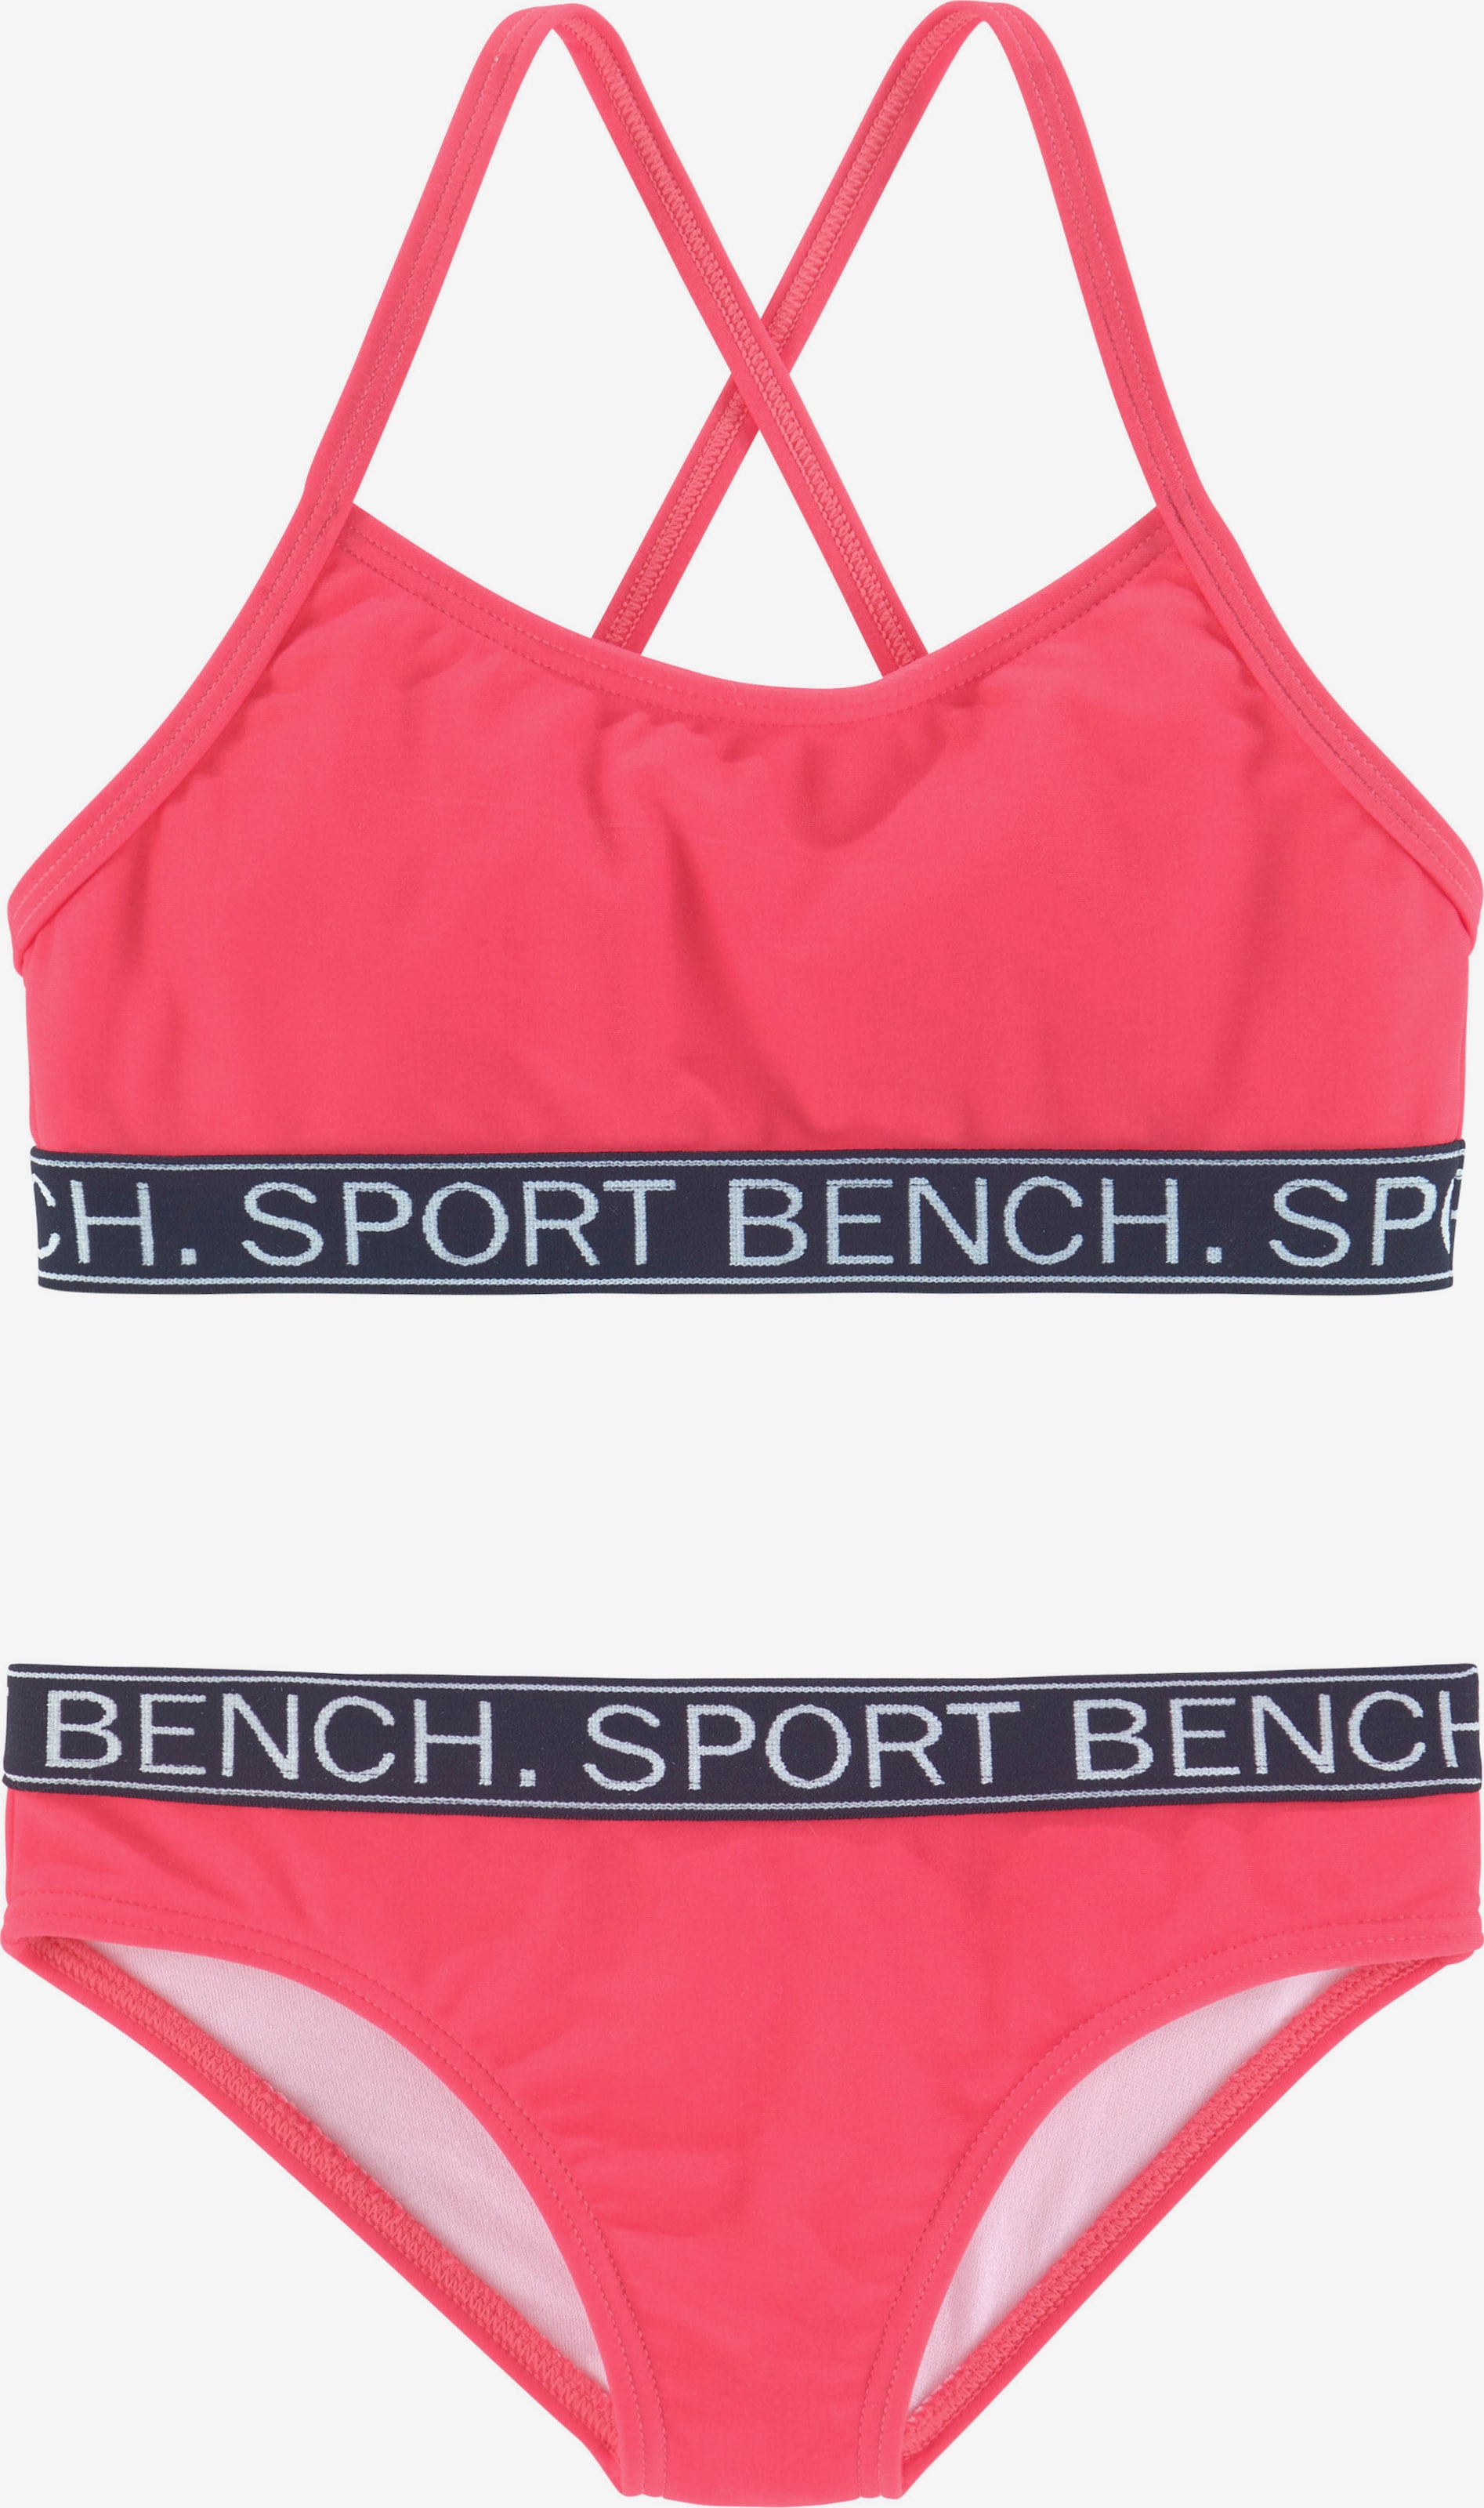 BENCH Bustier Bikini YOU in | ABOUT Pink